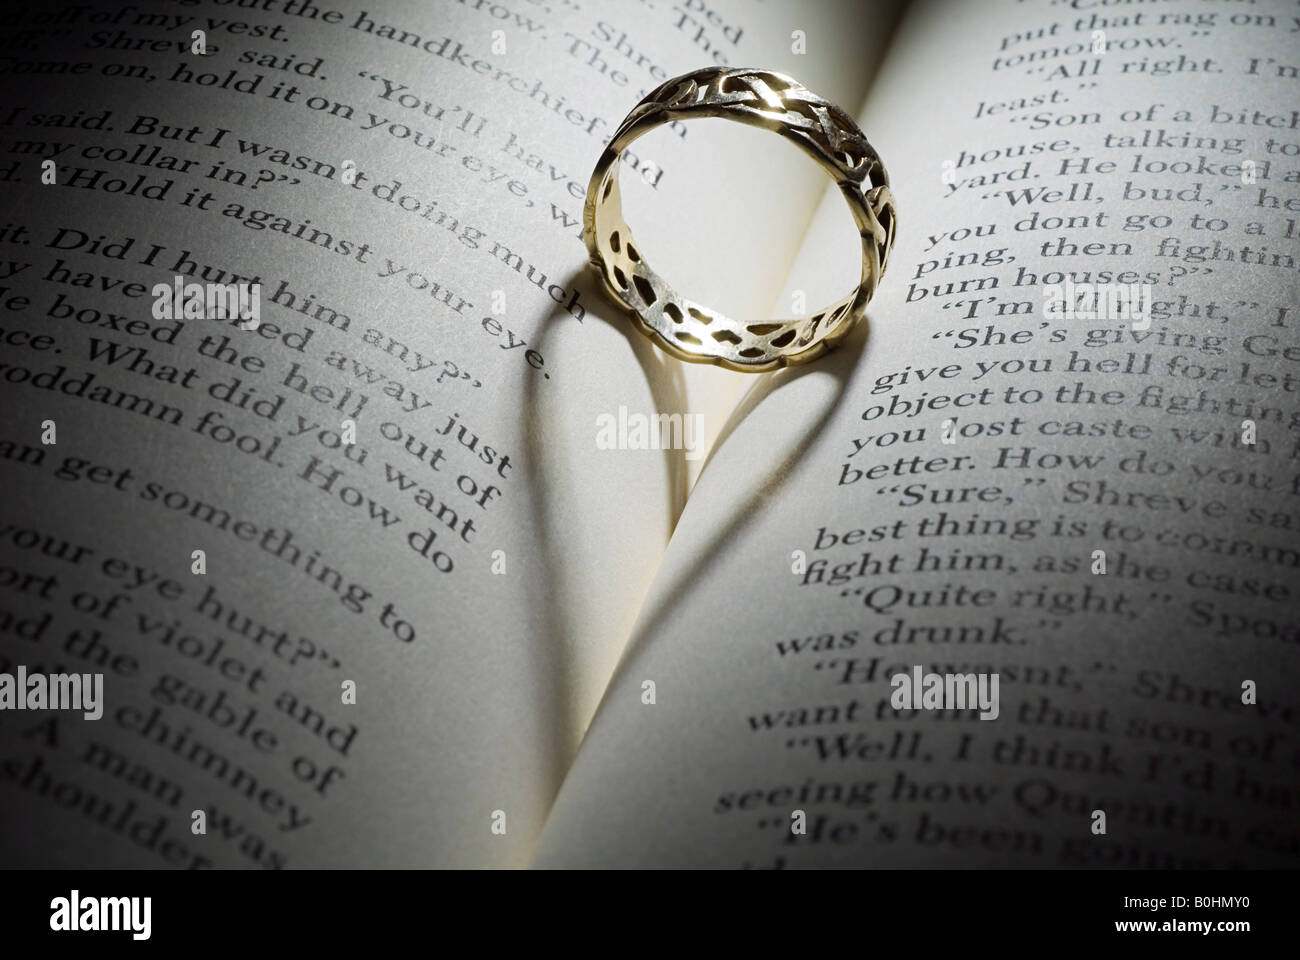 Ring in the fold of an open book, shadow forming a heart Stock Photo